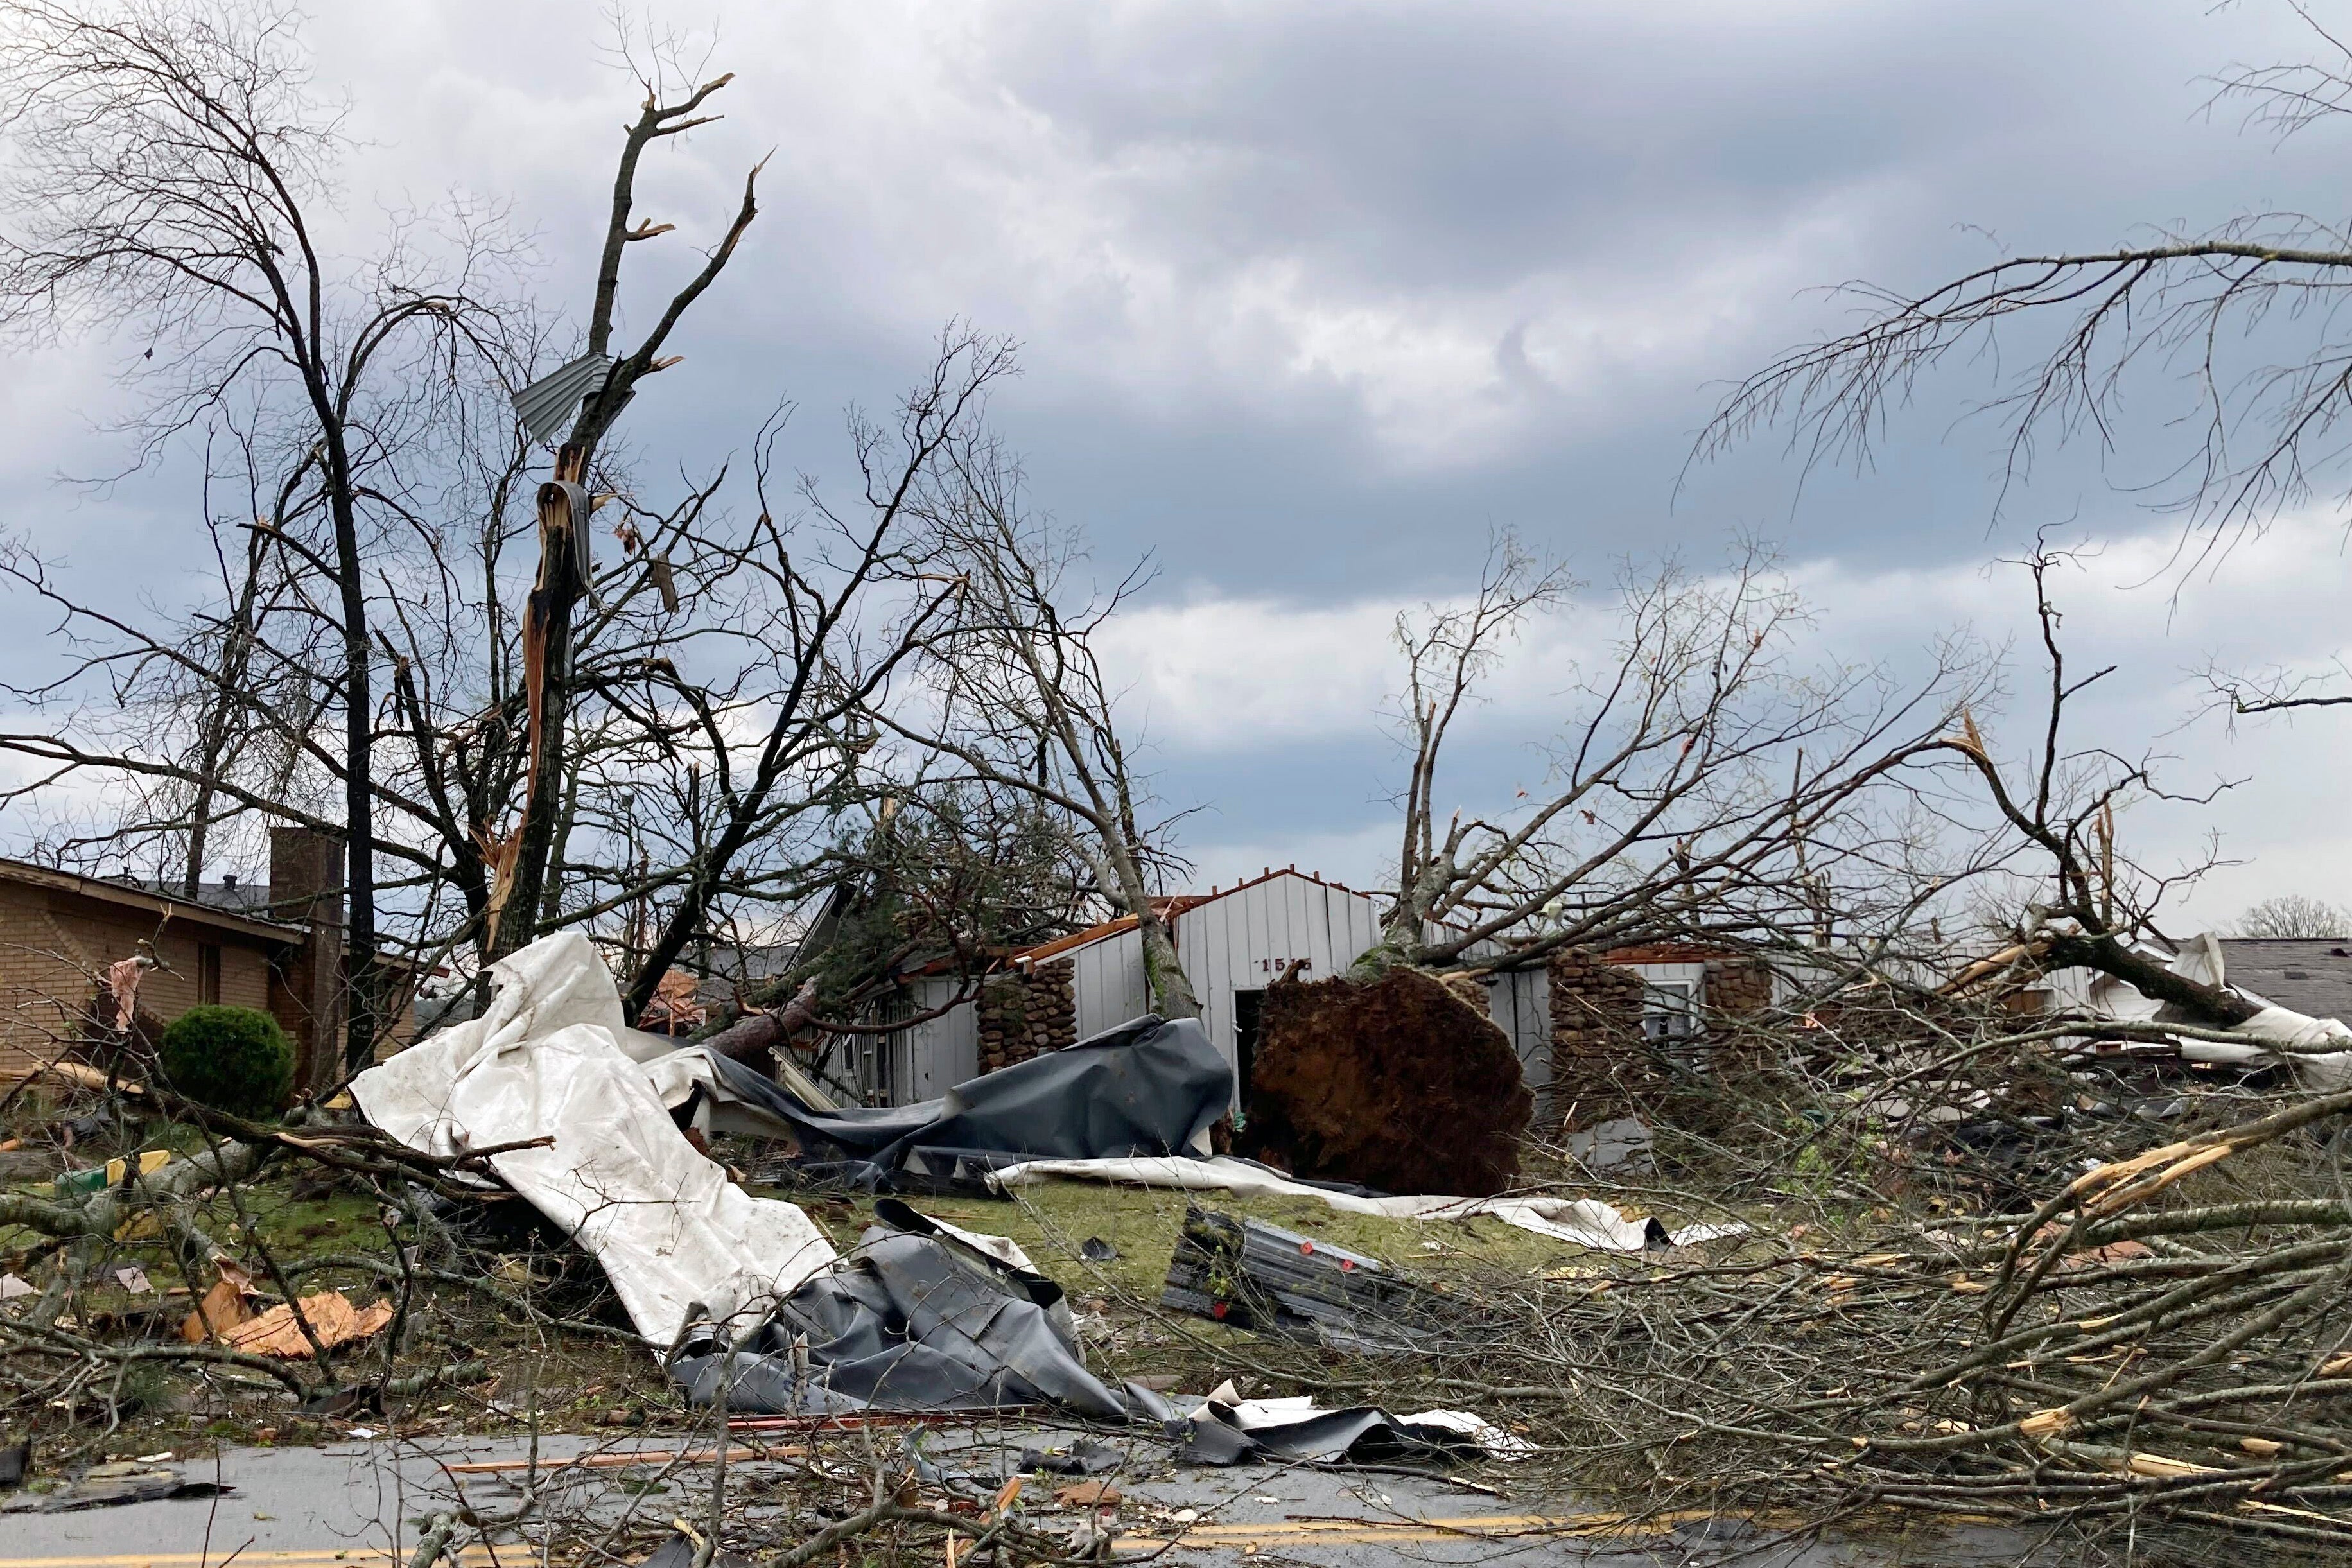 A home is damaged and trees are down after a tornado swept through Little Rock, Ark., Friday, March 31, 2023